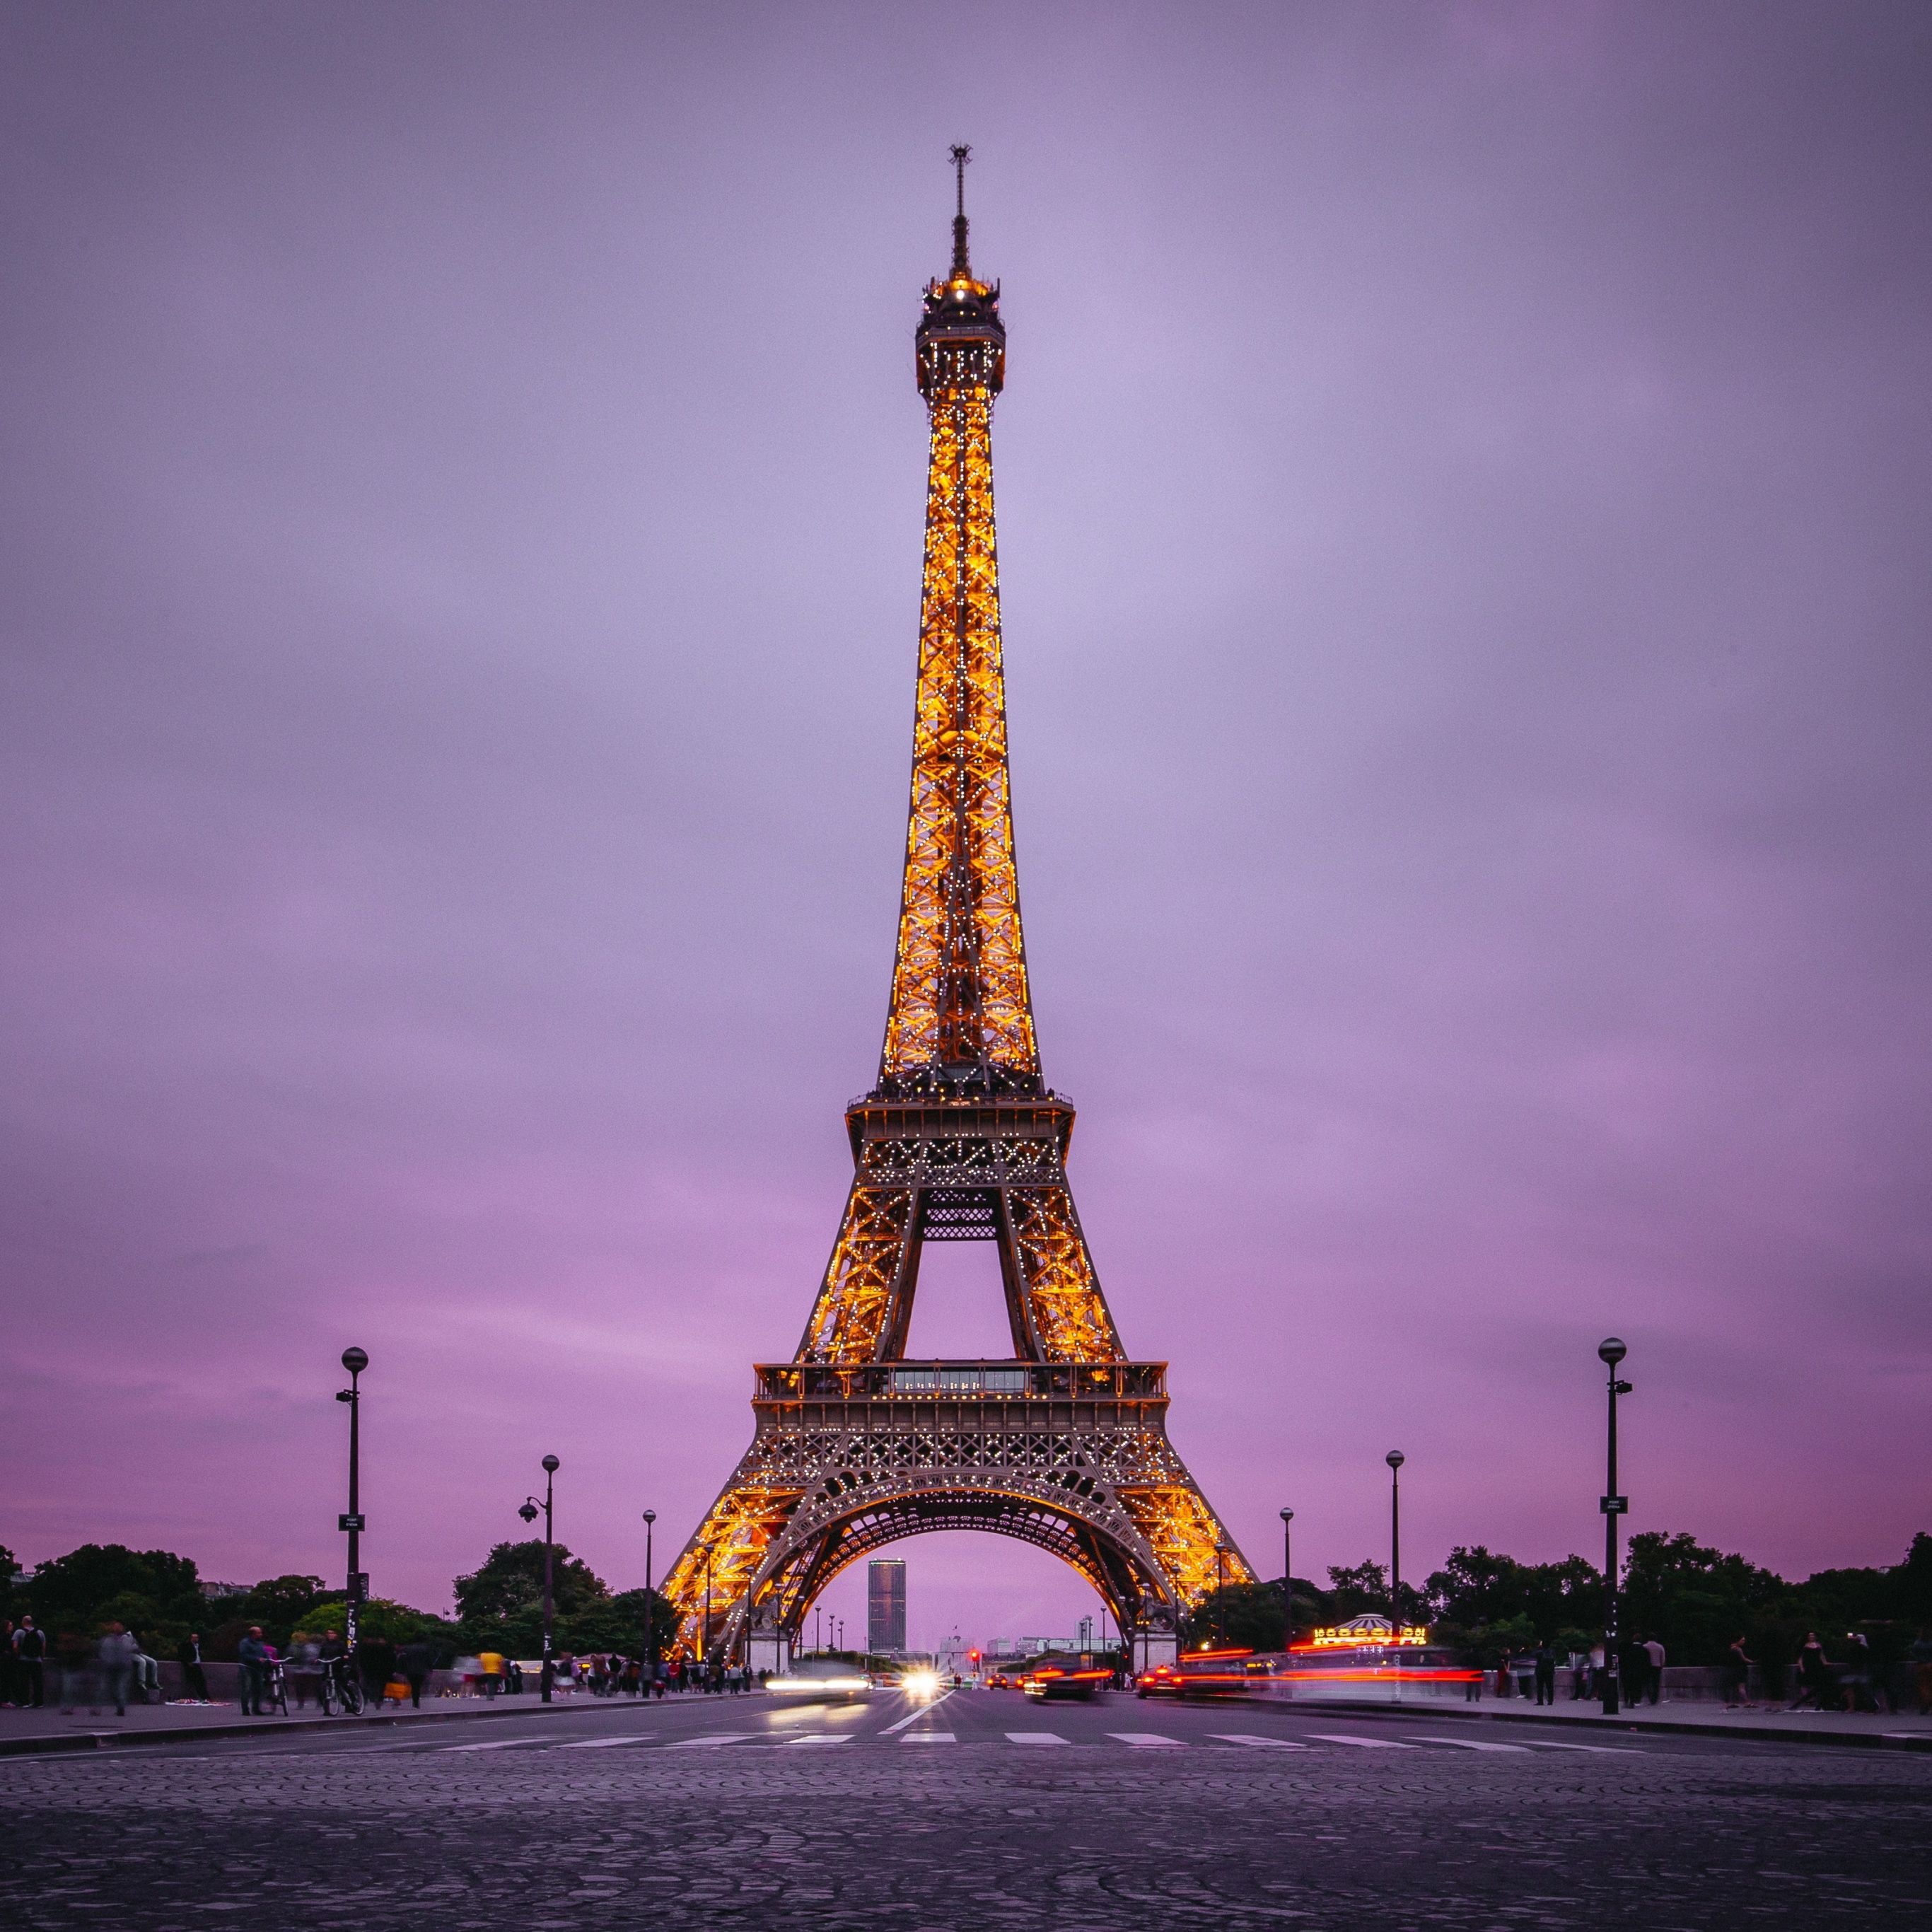 The eiffel tower is lit up at night - Paris, Eiffel Tower